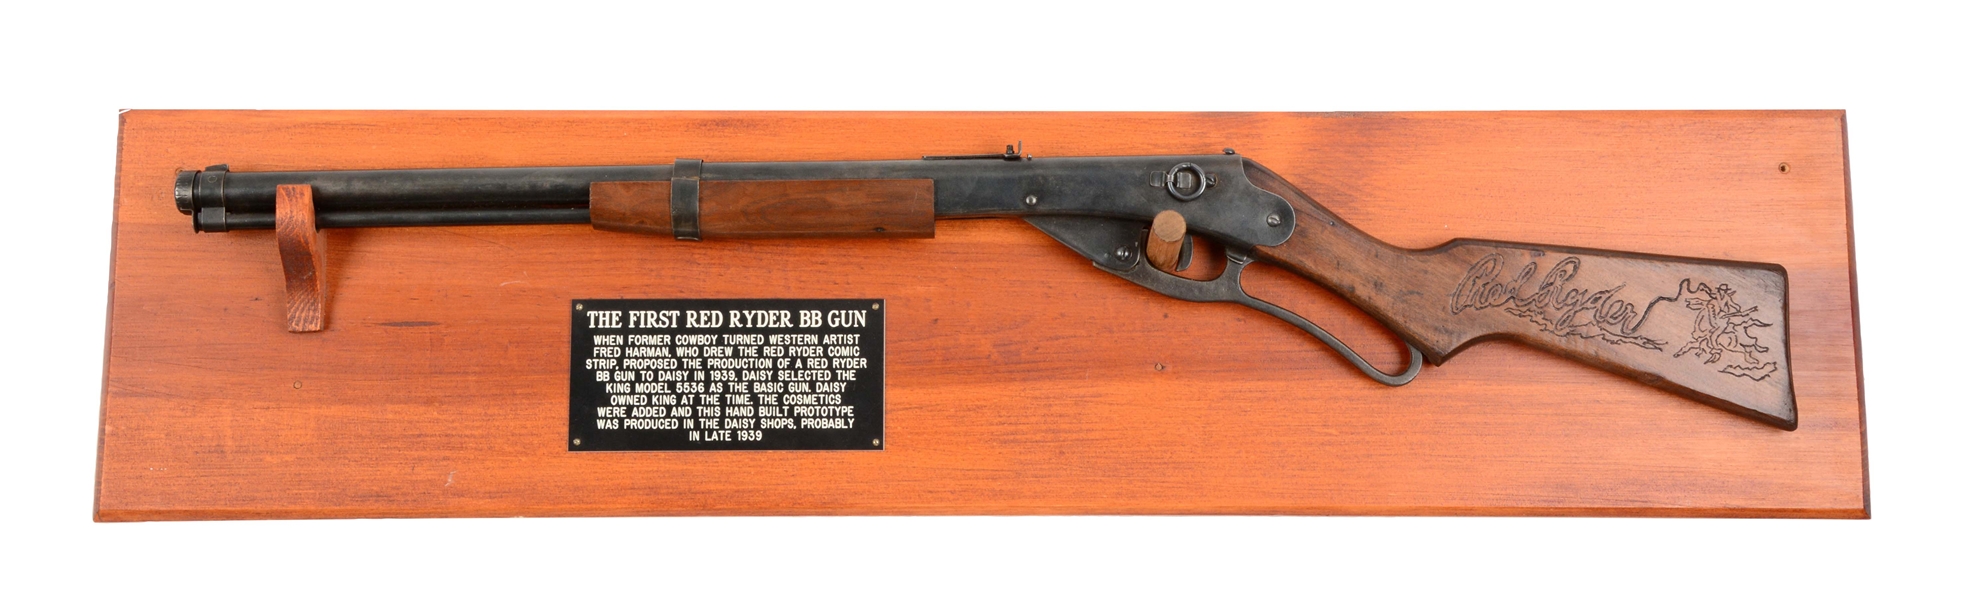 KING RED RYDER PROTOTYPE ON PLAQUE.